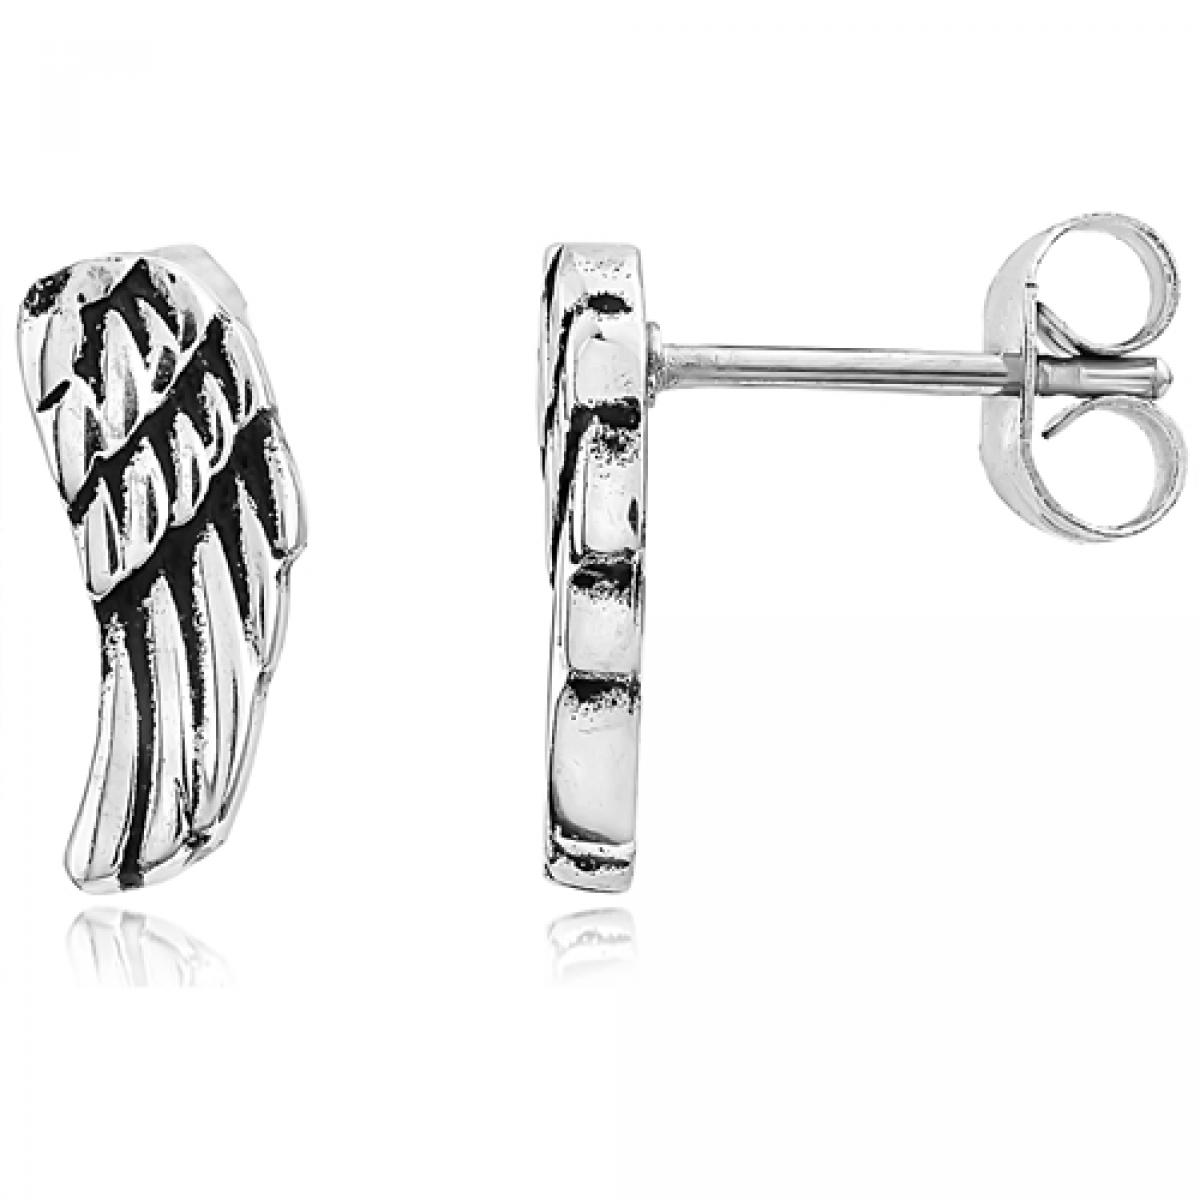 Picture of MDR Trading SS-SSS011 4.9 mm Stainless Steel Studs Black & Silver Wings Earrings